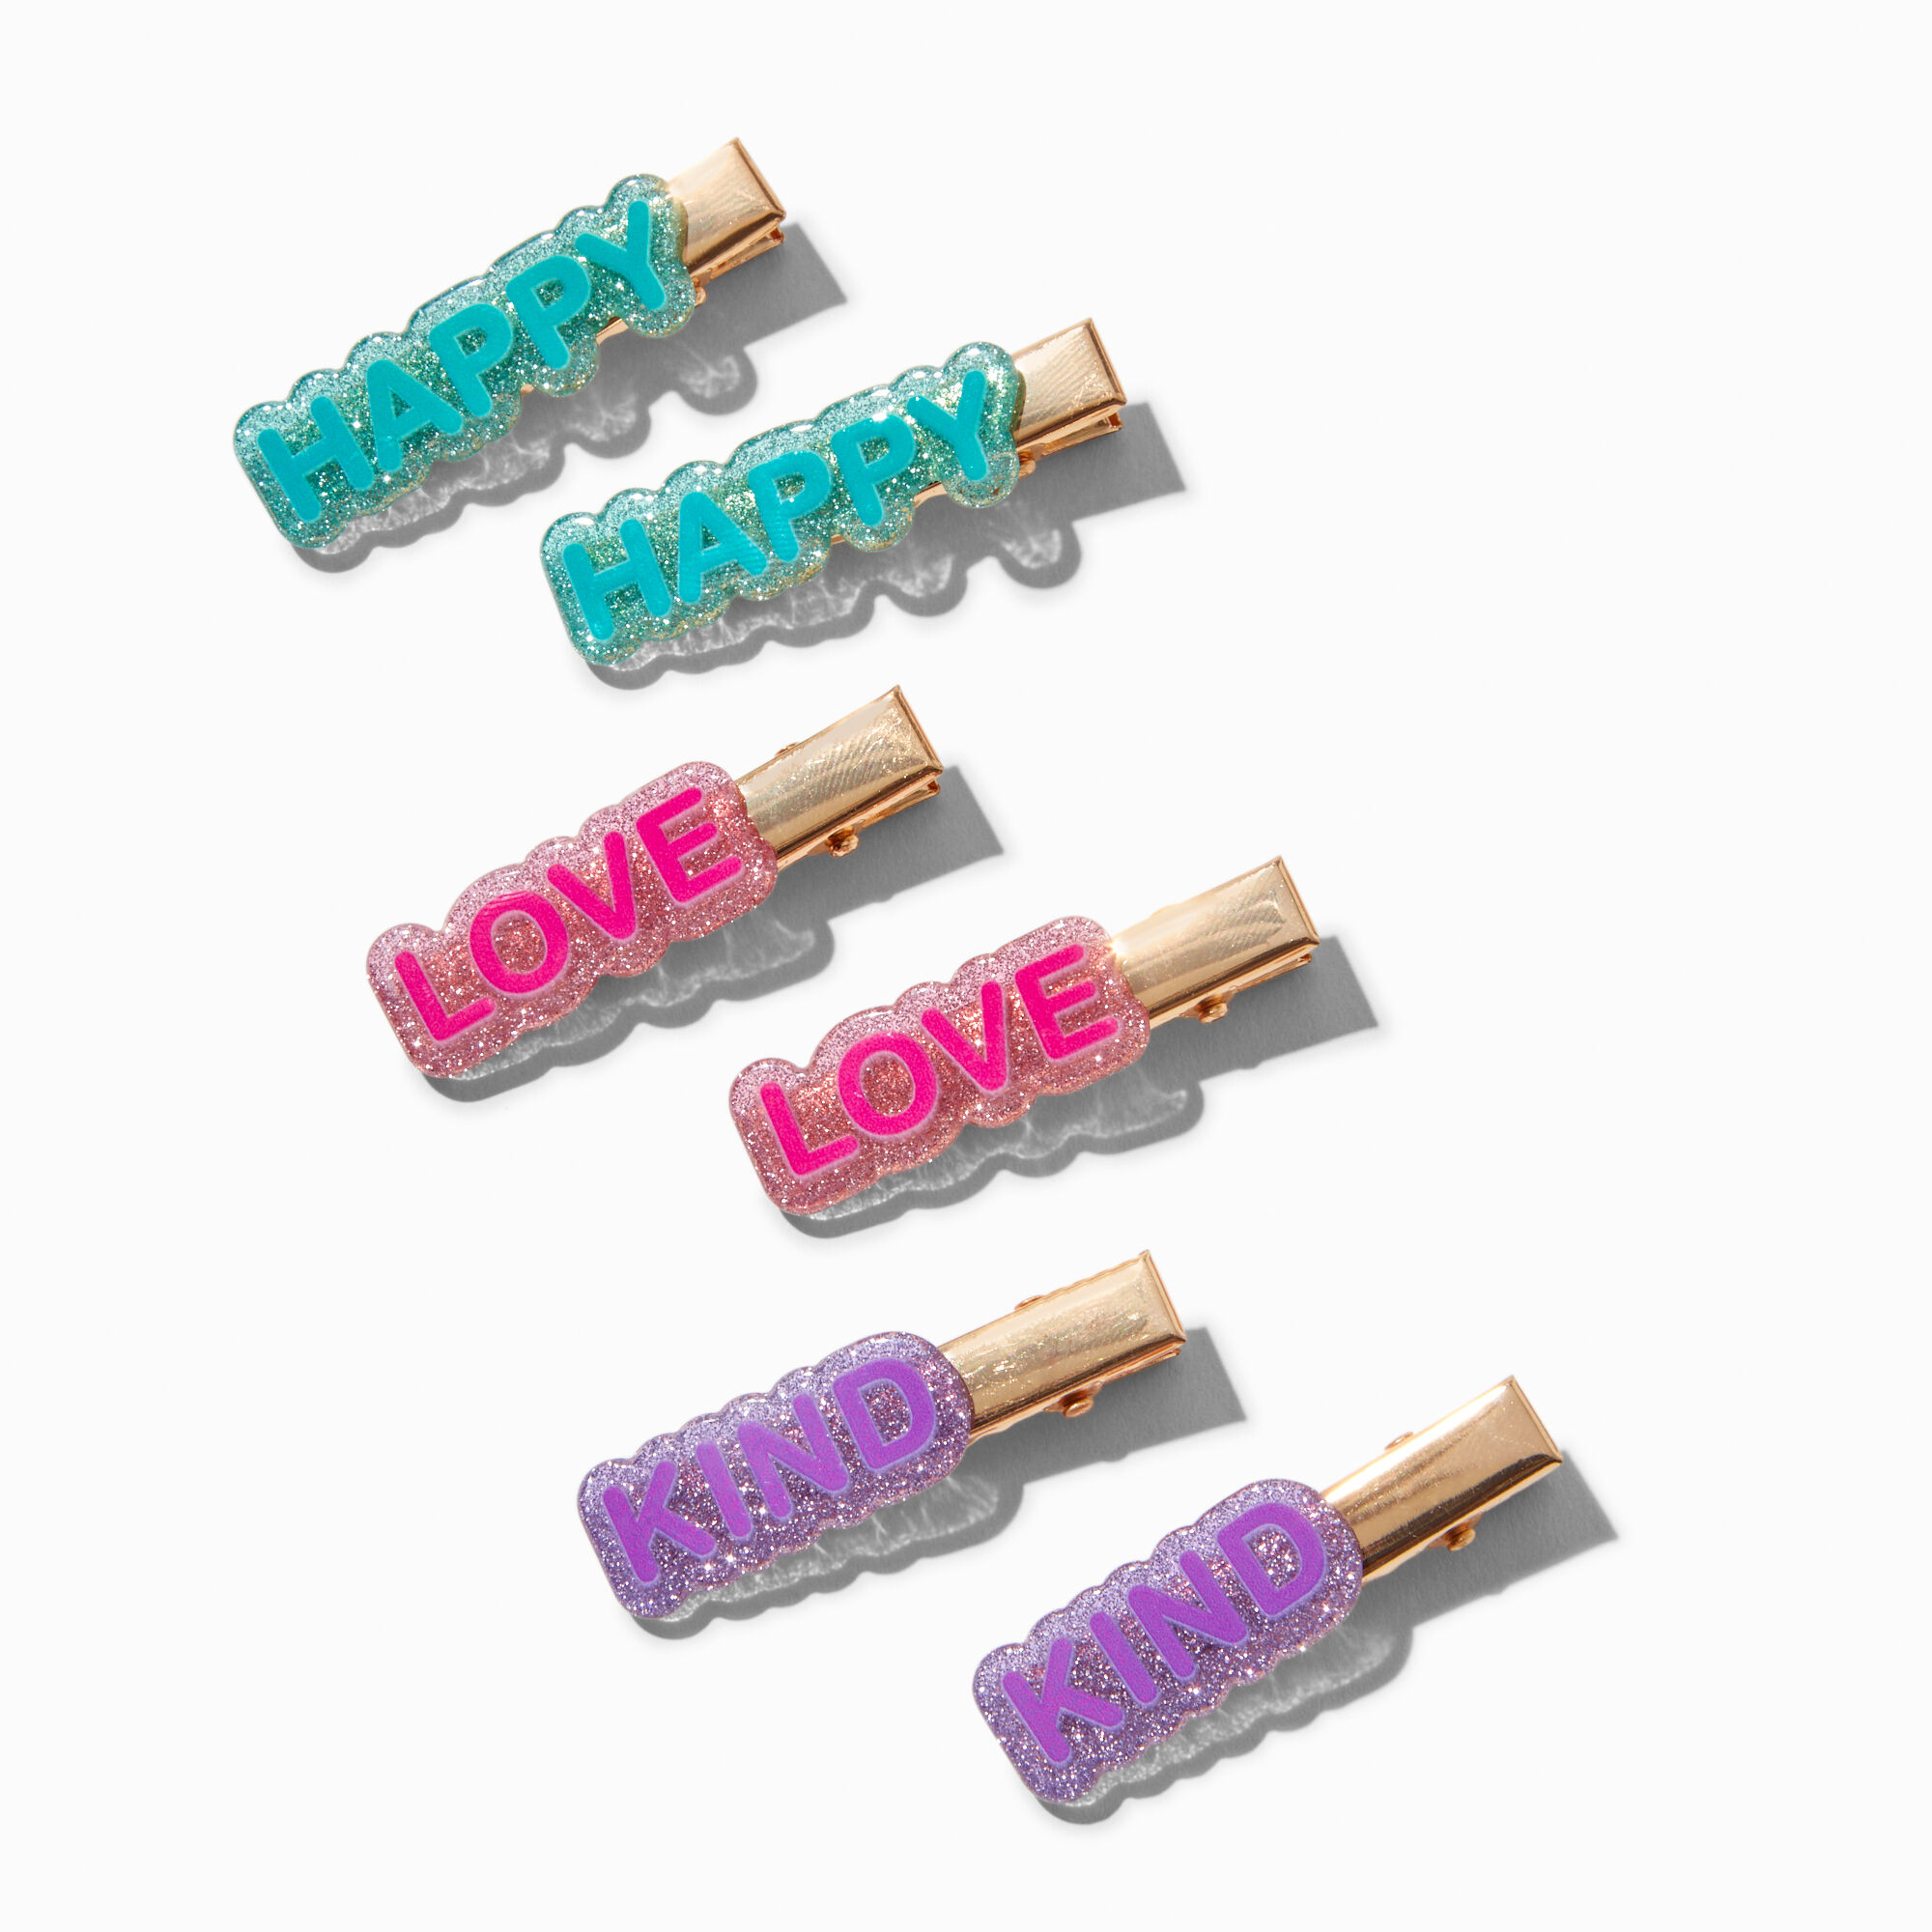 View Claires Club Jewel Tone Affirmation Hair Clips 6 Pack information